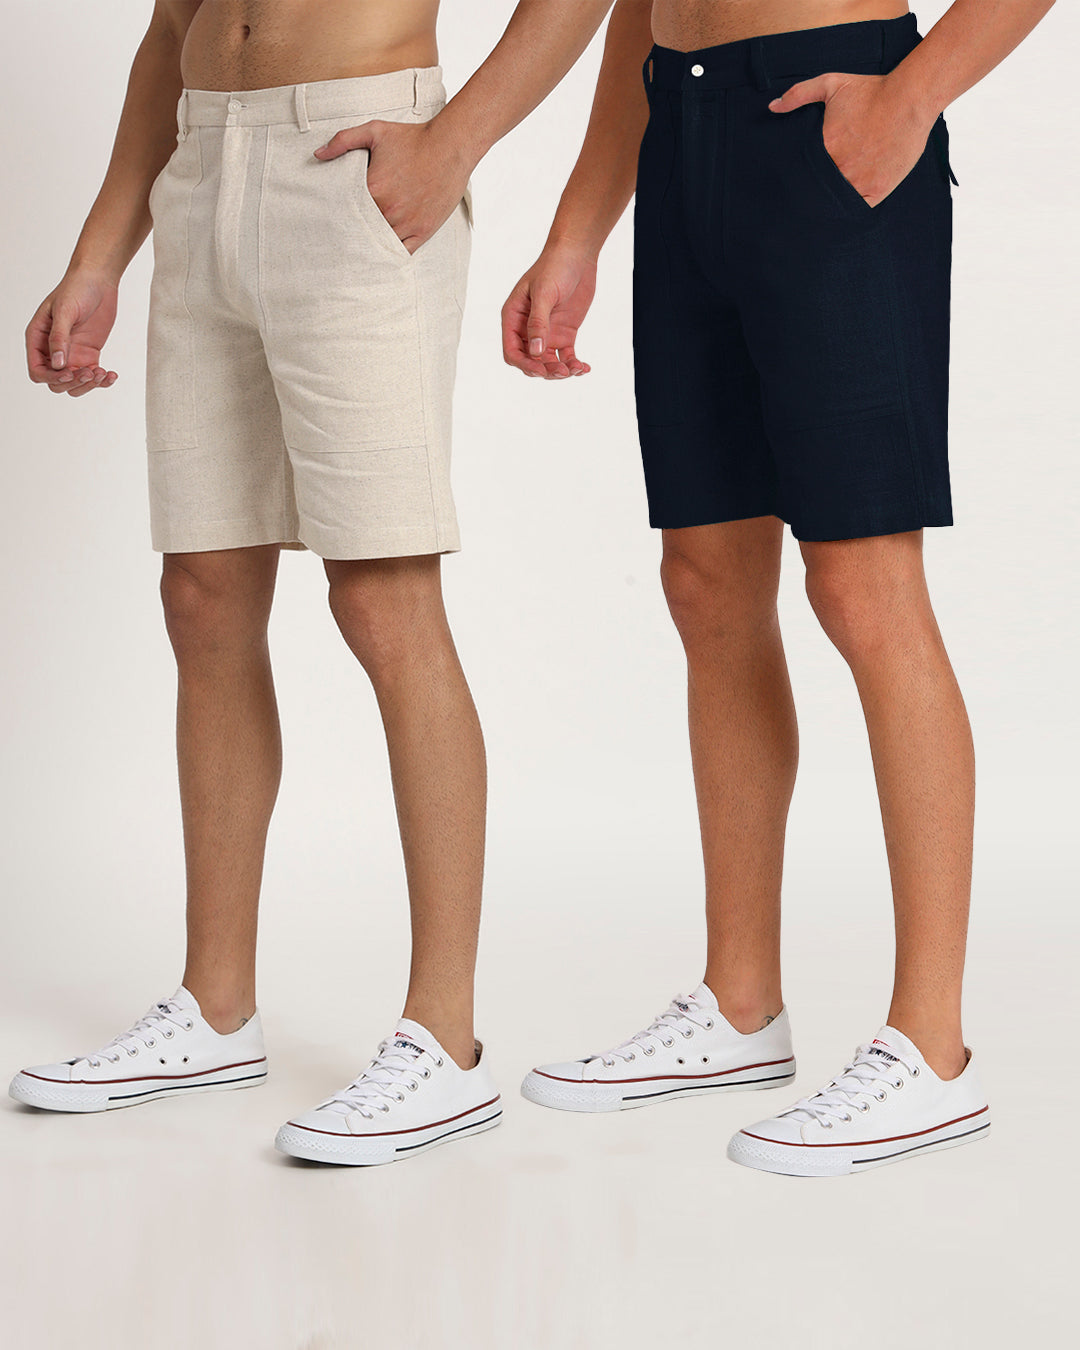 Combo : Patch Pocket Playtime Beige & Midnight Blue Men's Shorts